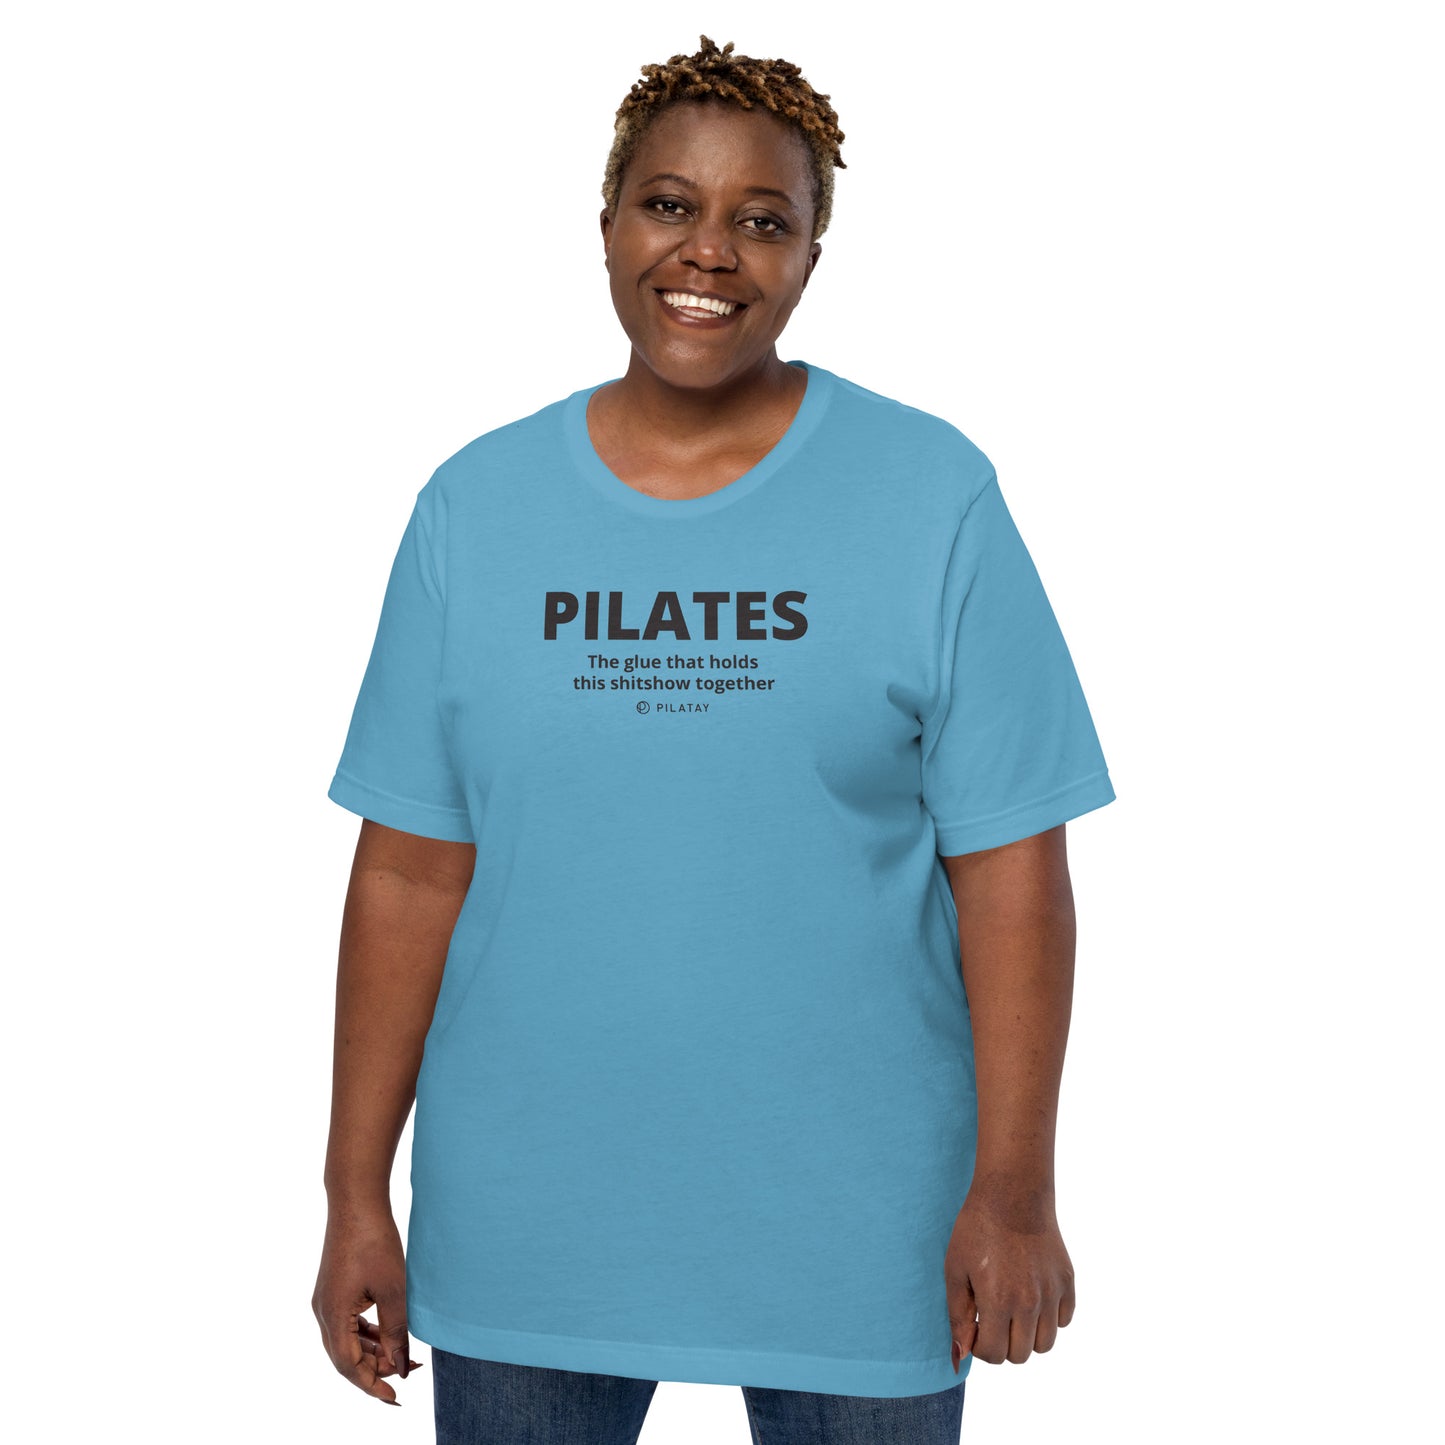 Pilates: The Glue That Holds This Shitshow Together - Unisex T-shirt